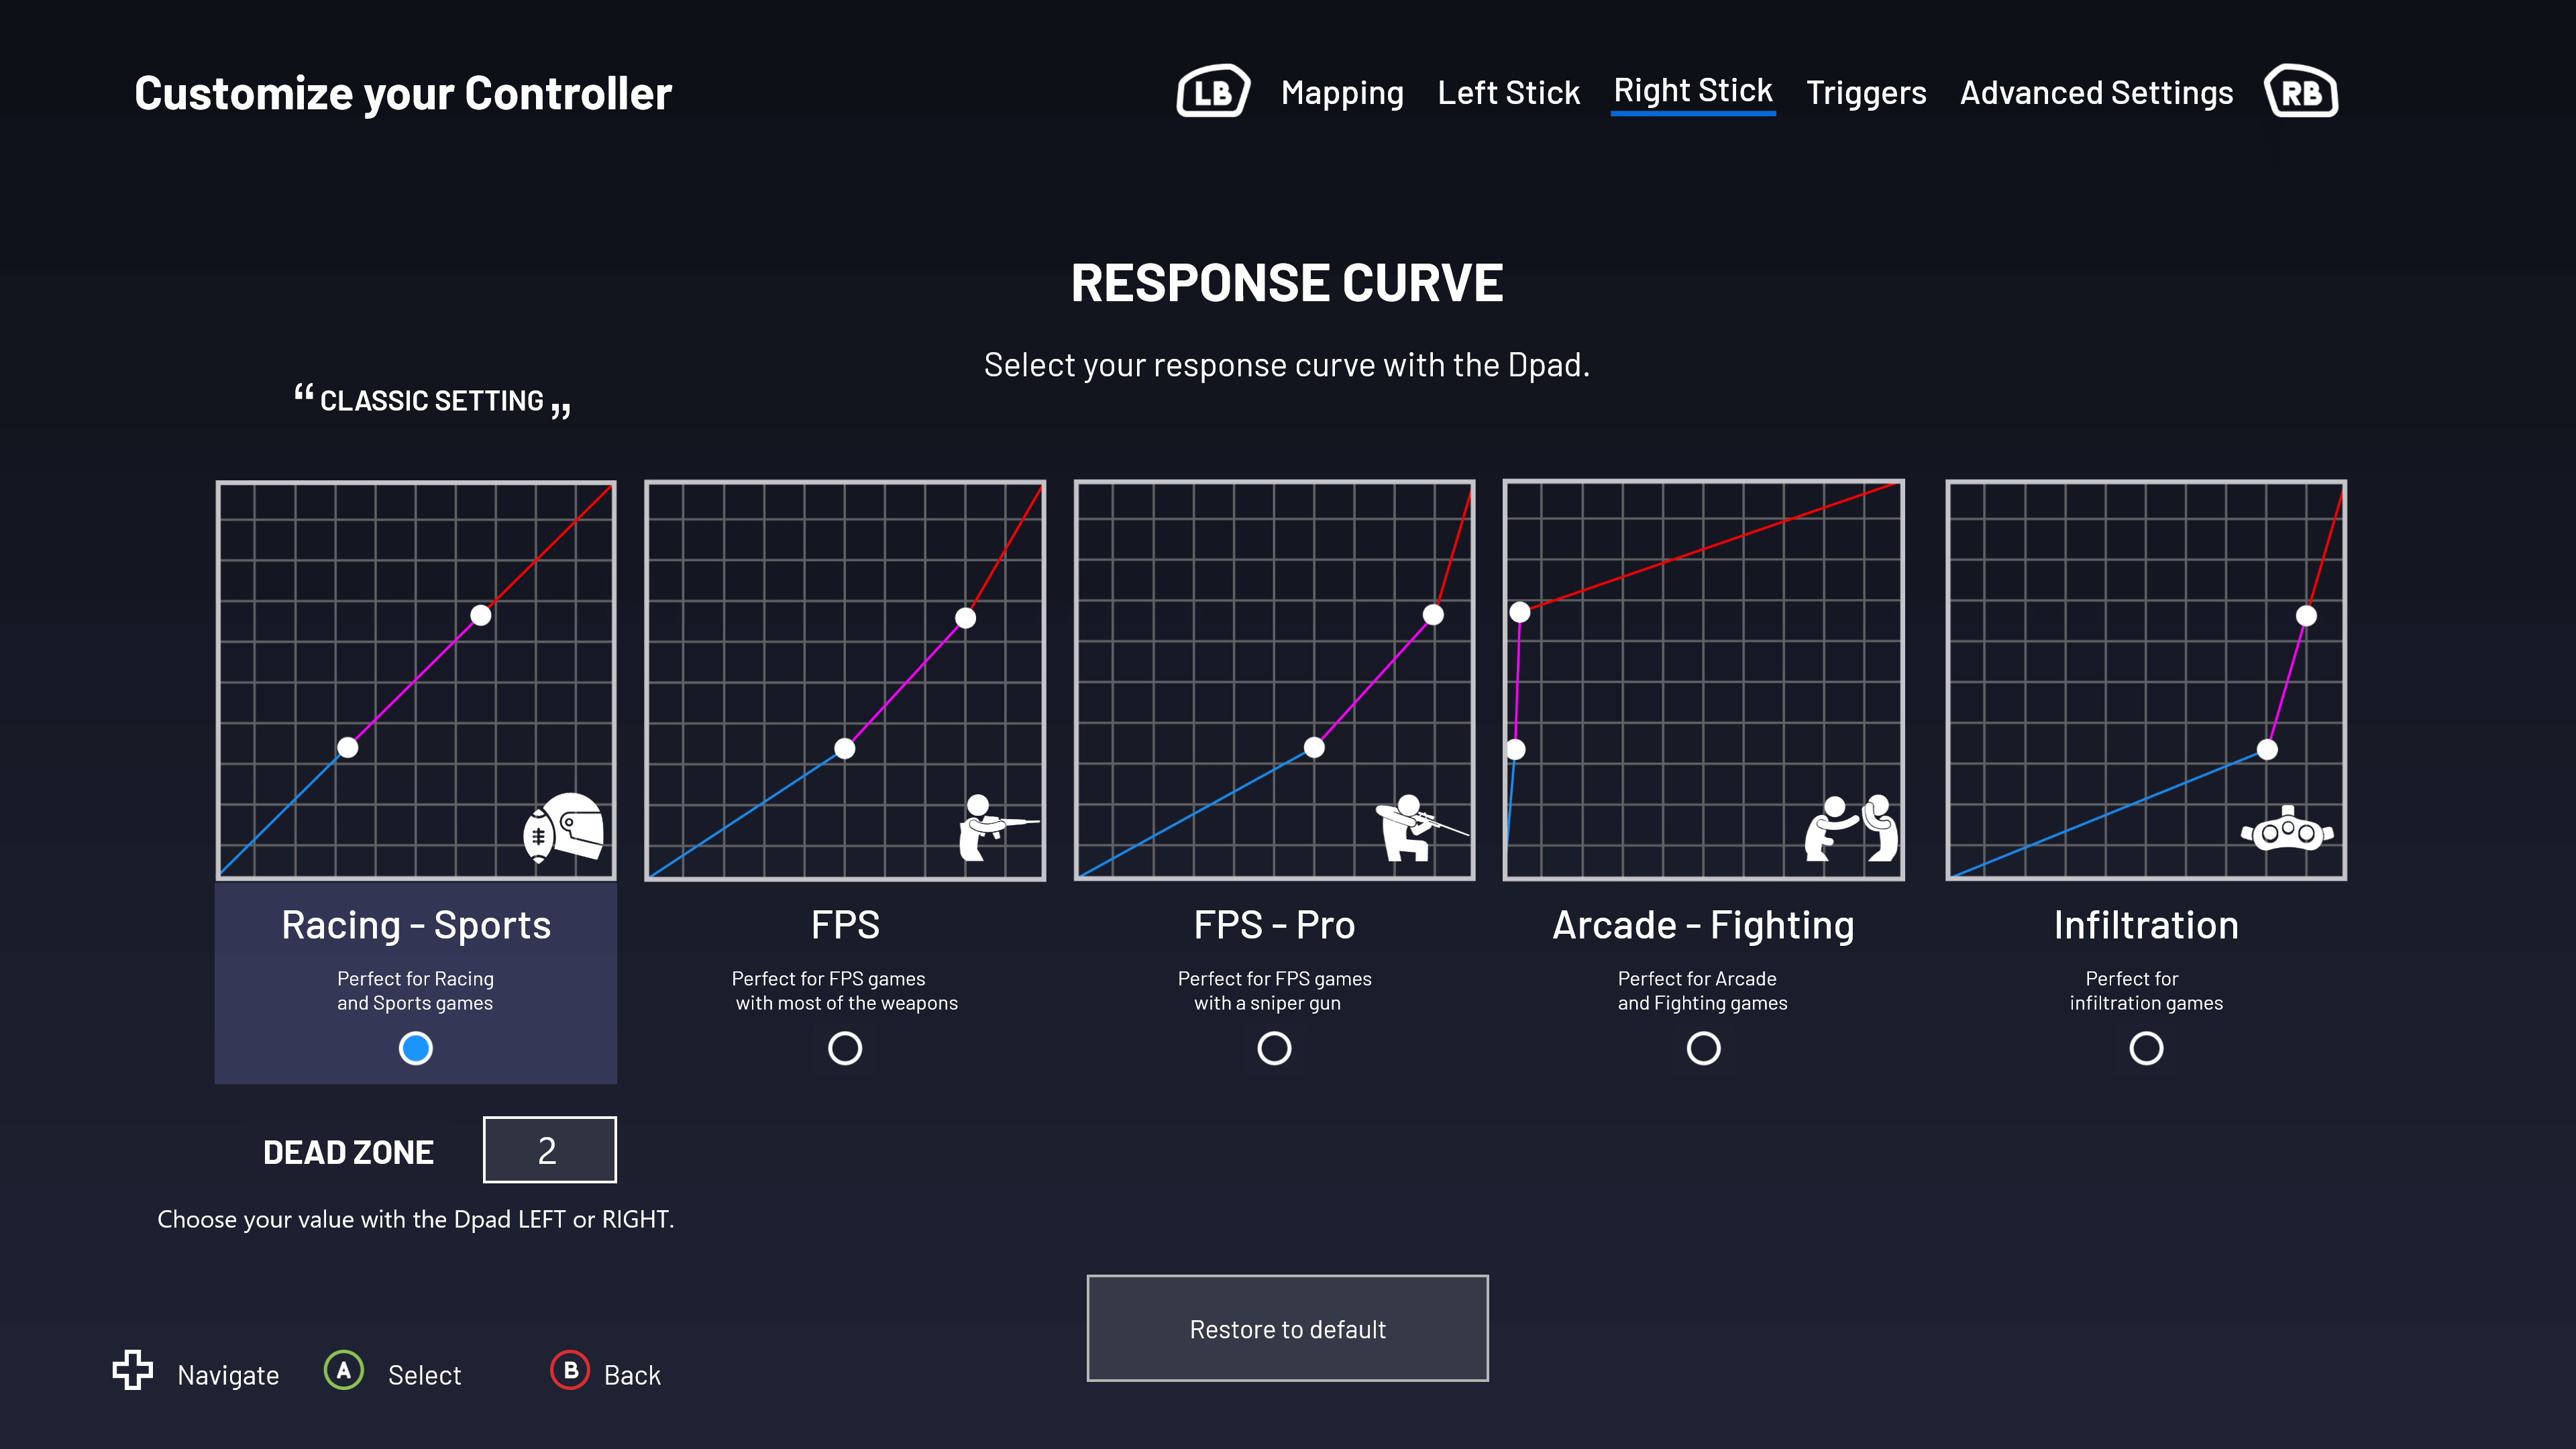 An example screenshot of the companion app is shown. This shot includes charts of sensitivity settings for the thumbsticks on the controller.